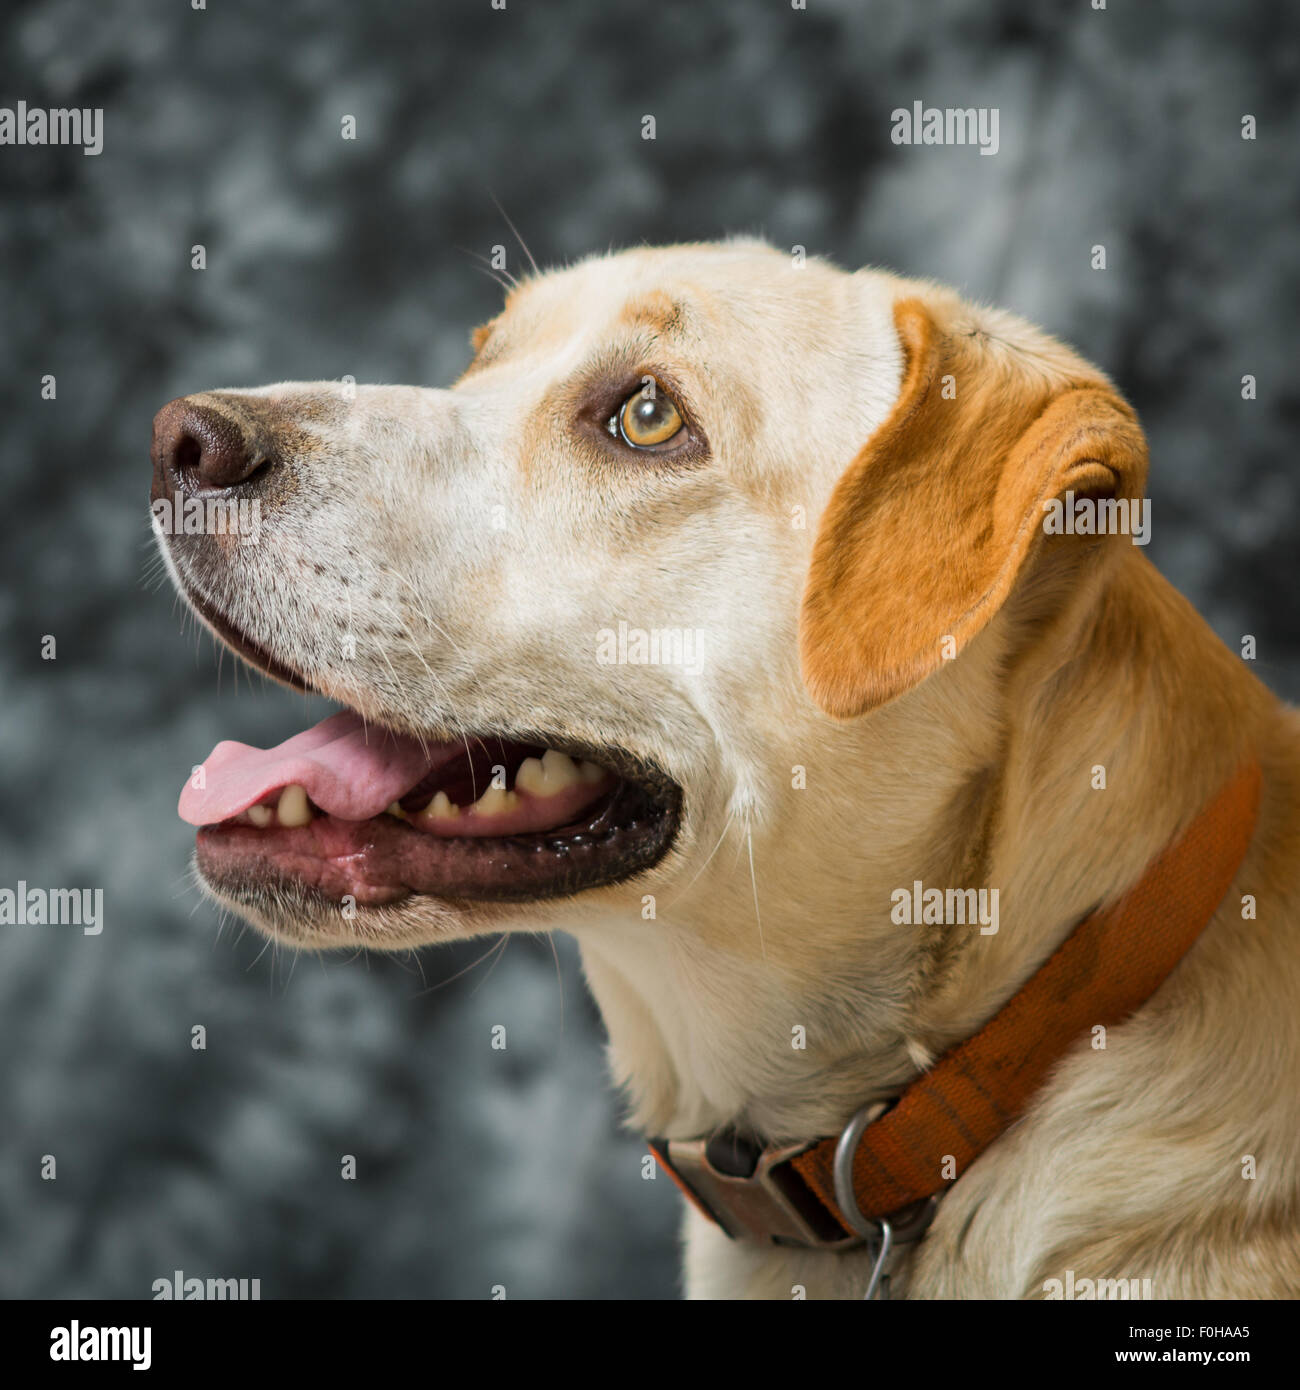 Yellow dog portrait looking up Stock Photo